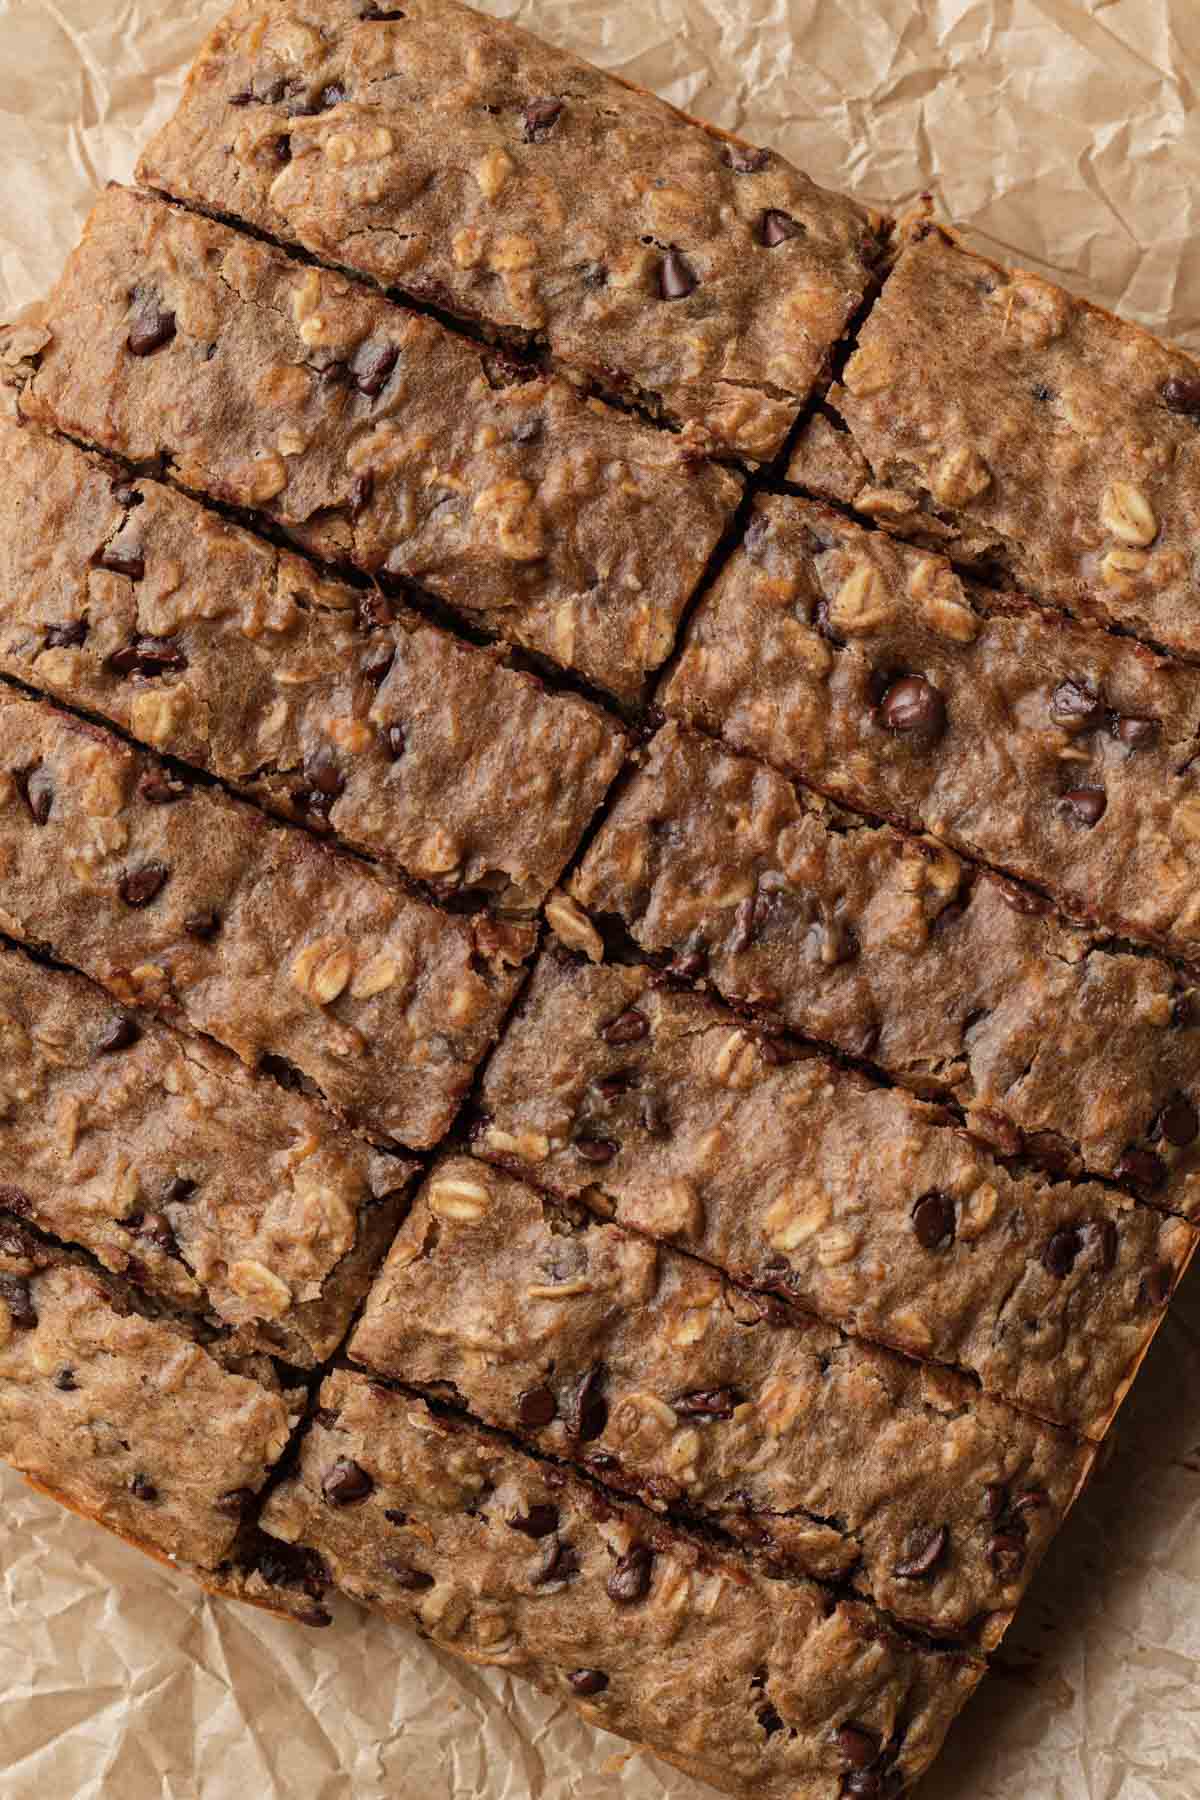 Freshly baked peanut butter oatmeal banana bars cut into rectangles and ready to serve.